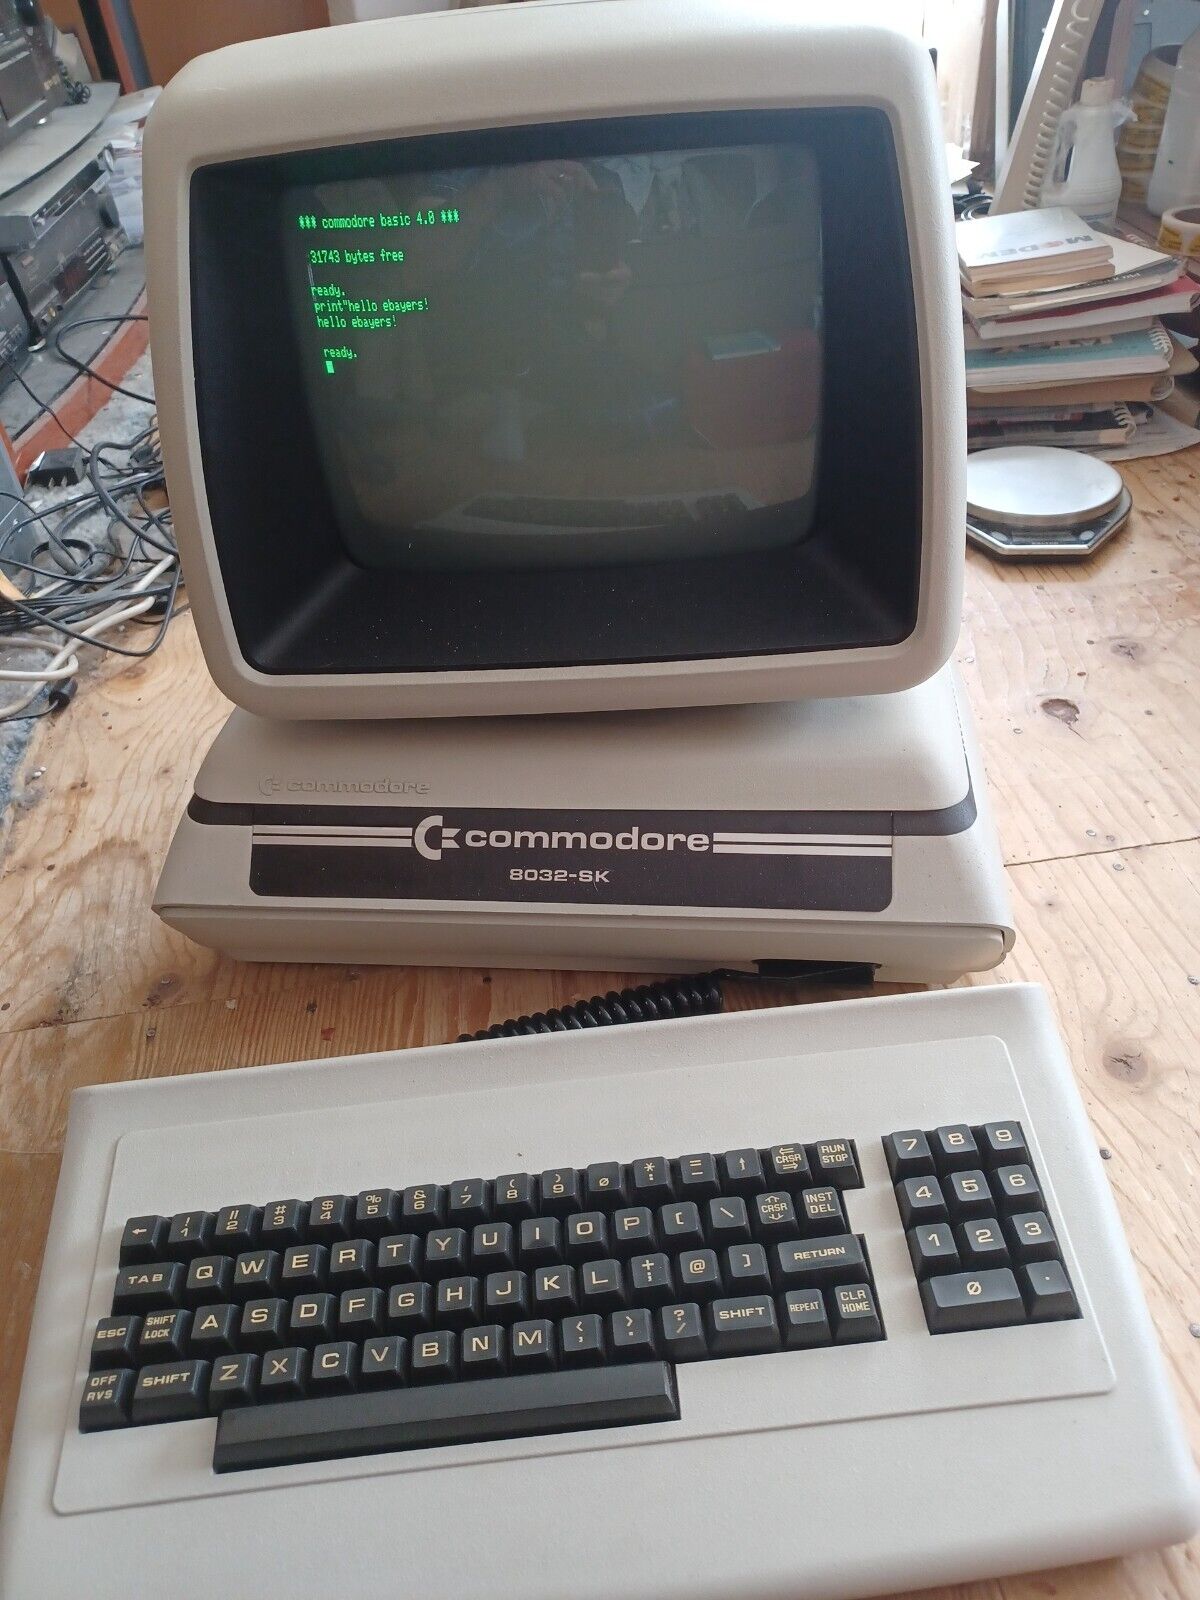 Commodore 8032 SK Computer - SUPER RARE  - Tested and working.  Super clean